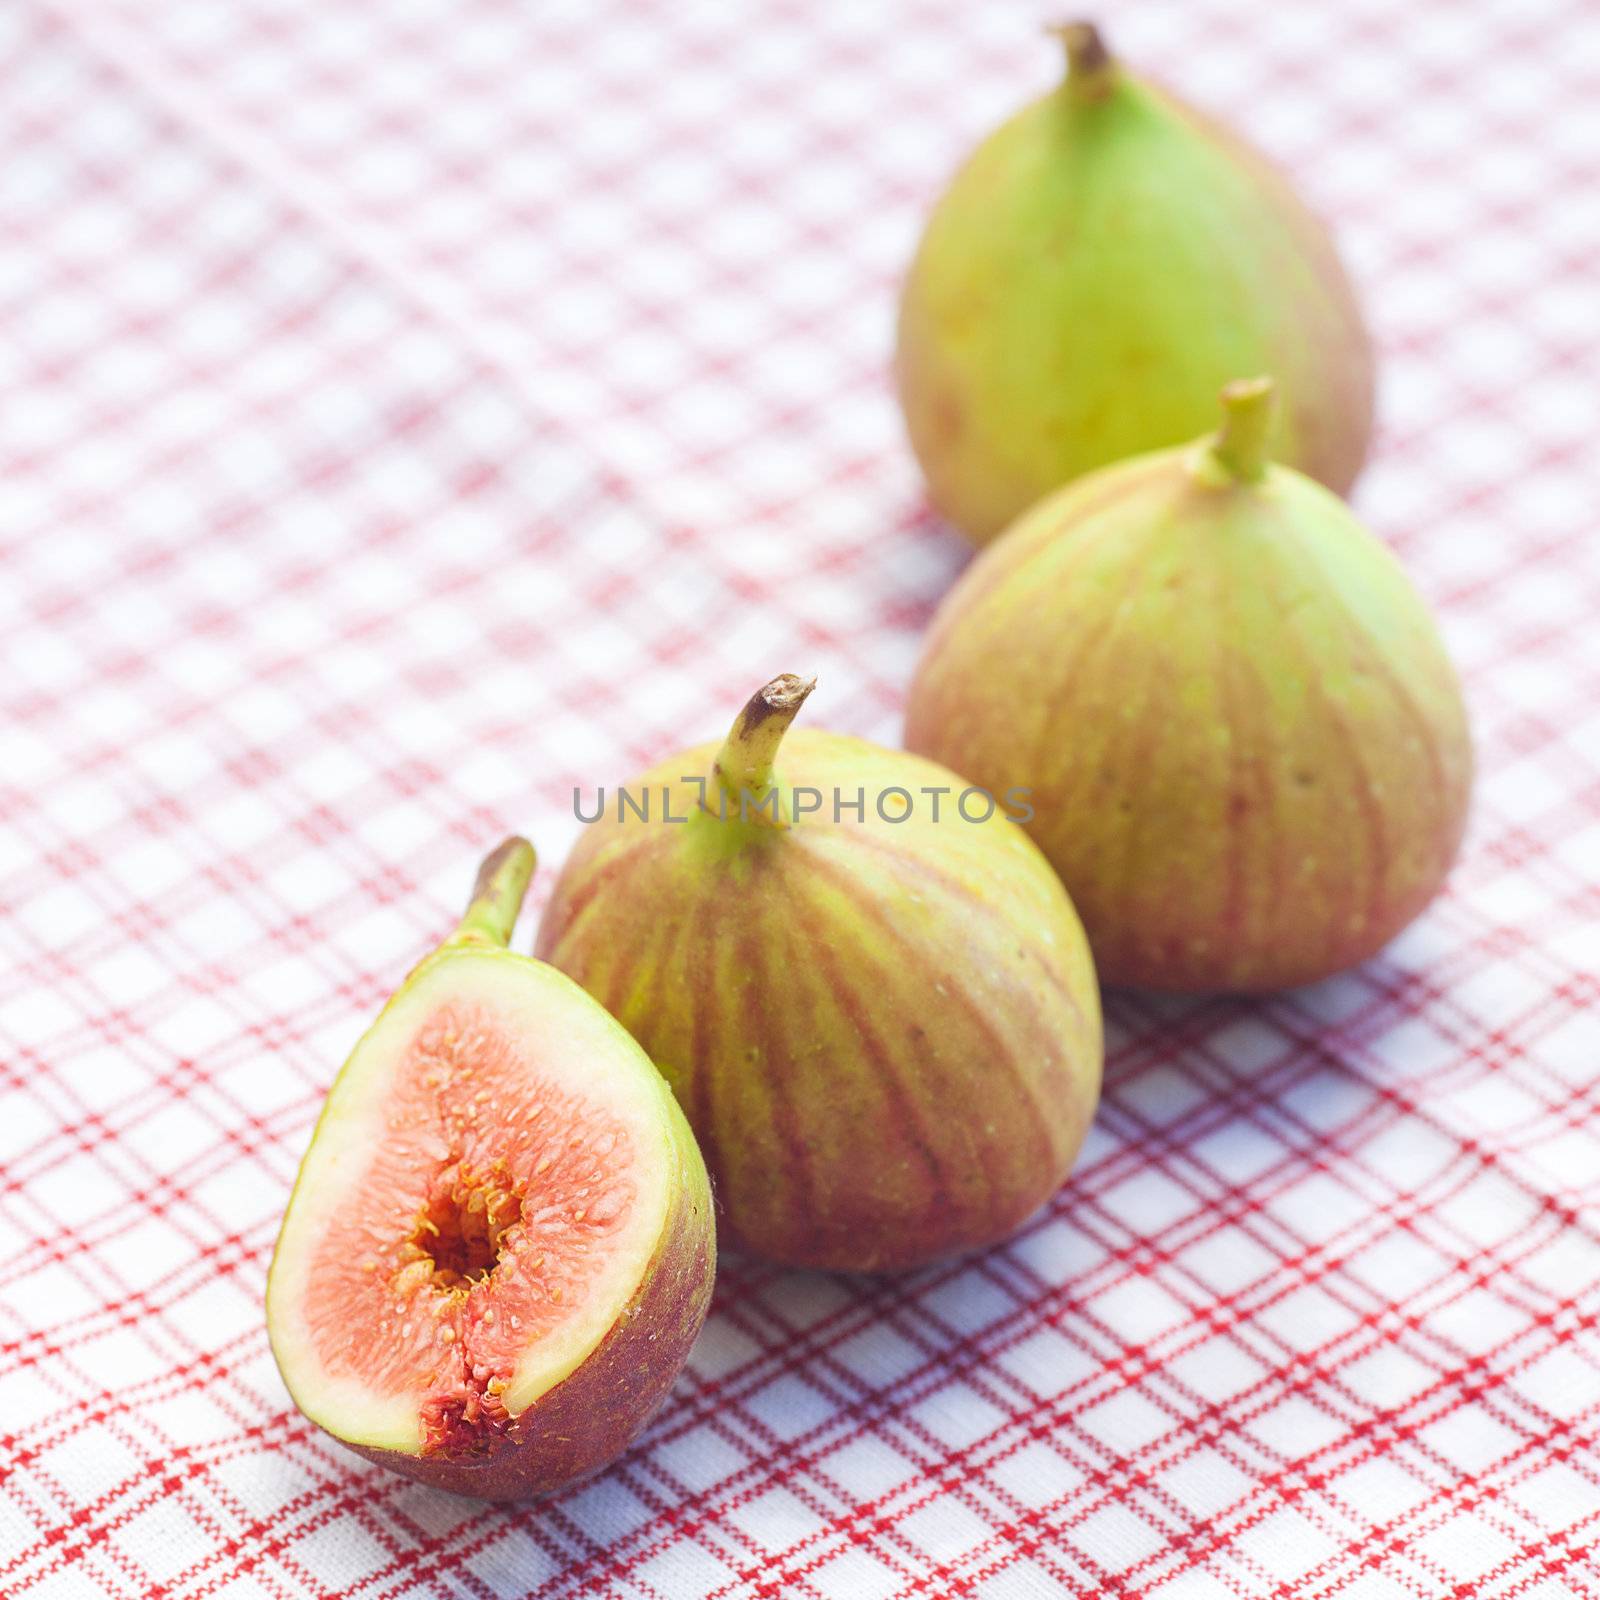 figs lying on plaid fabric by jannyjus